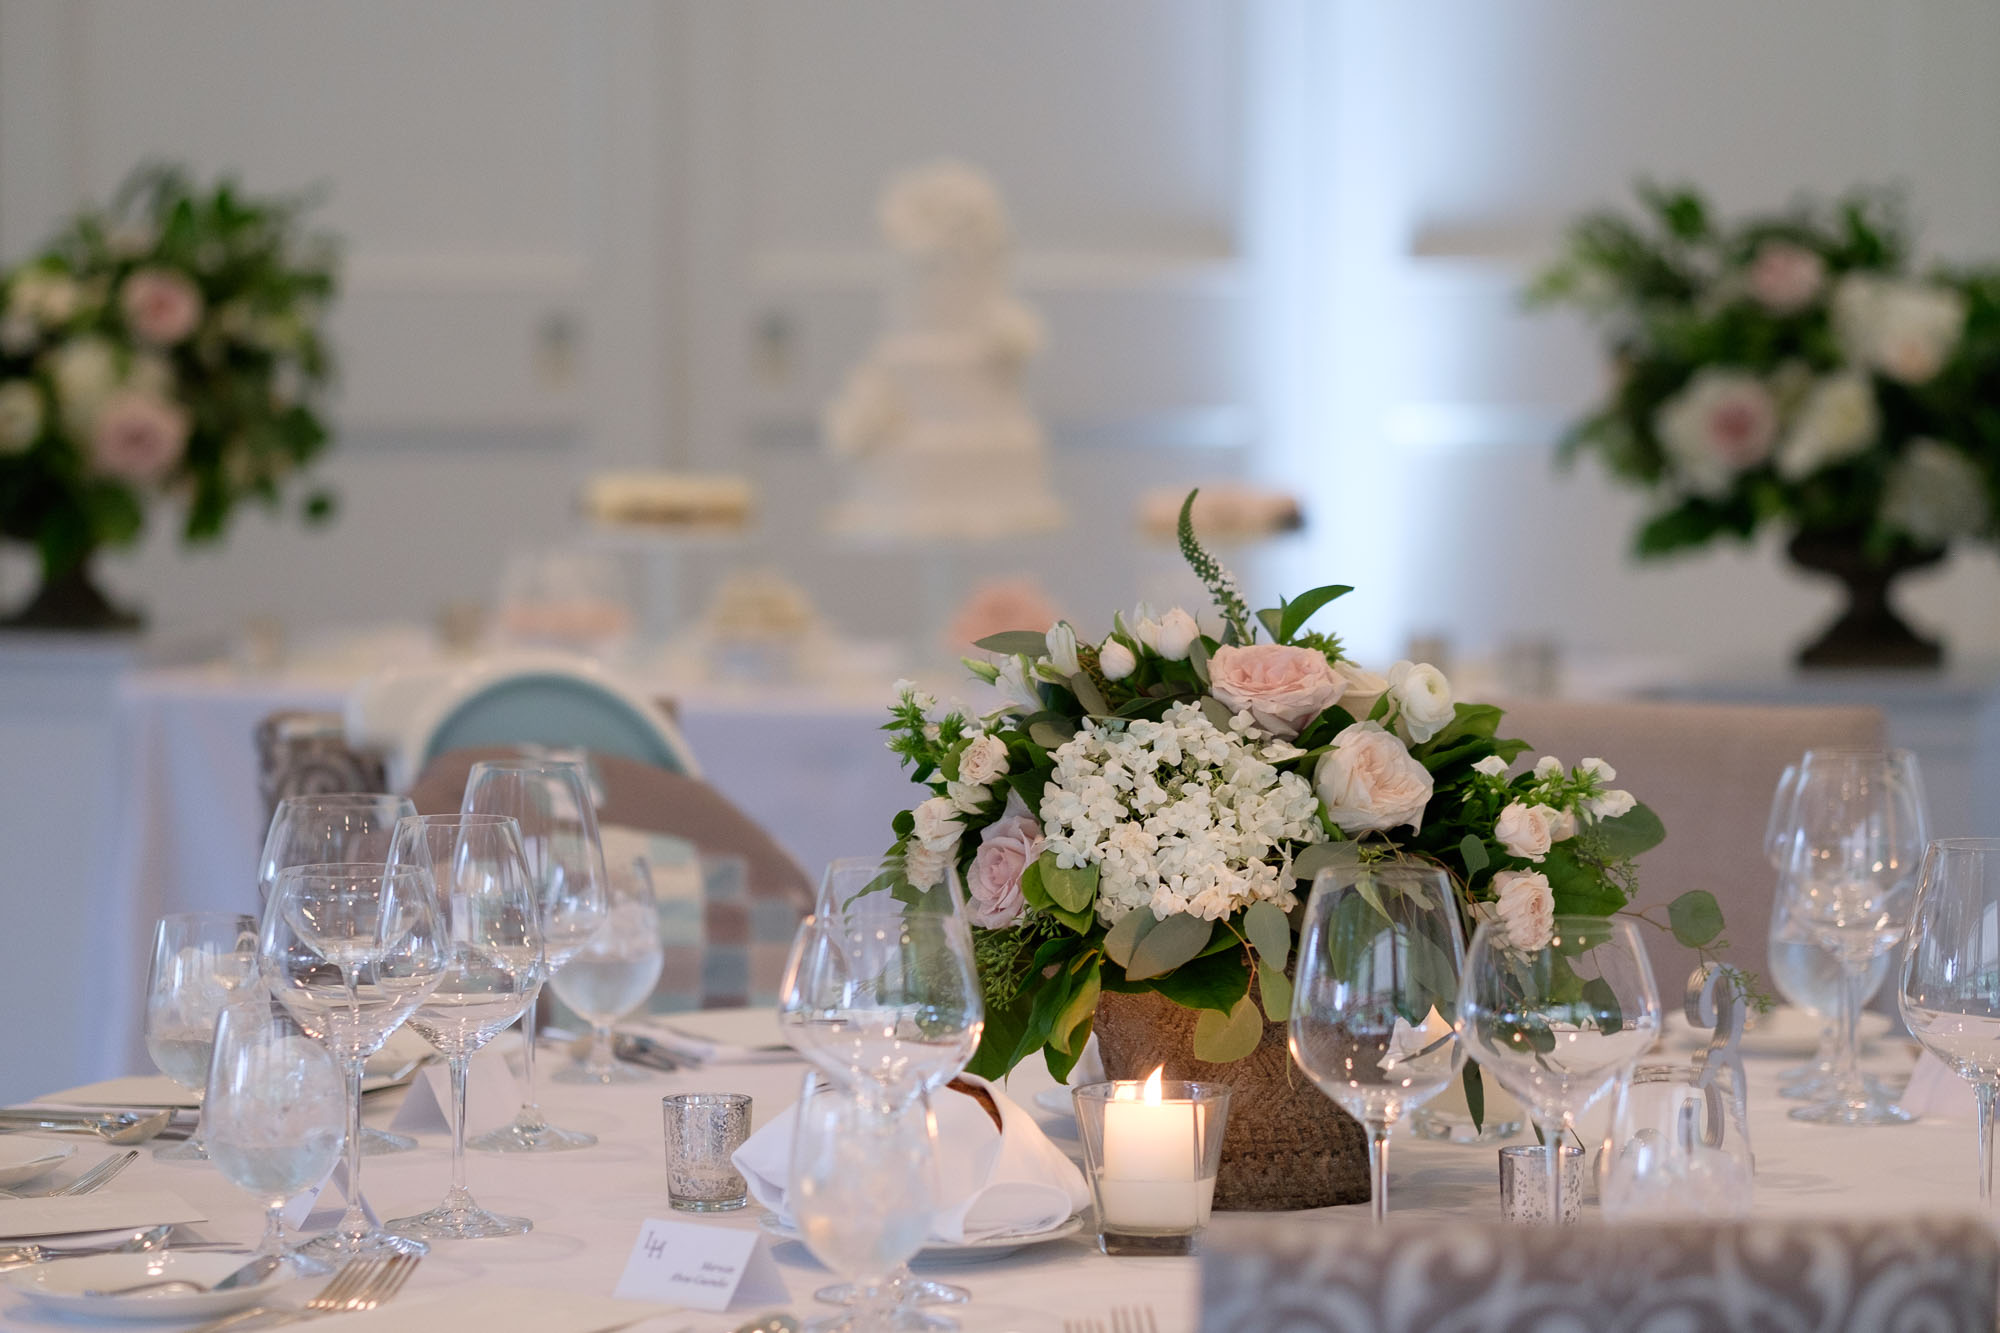  A wedding photograph of some of the details of the reception room at Teresa &amp; Robert's Langdon Hall wedding in Cambridge, Ontario. 